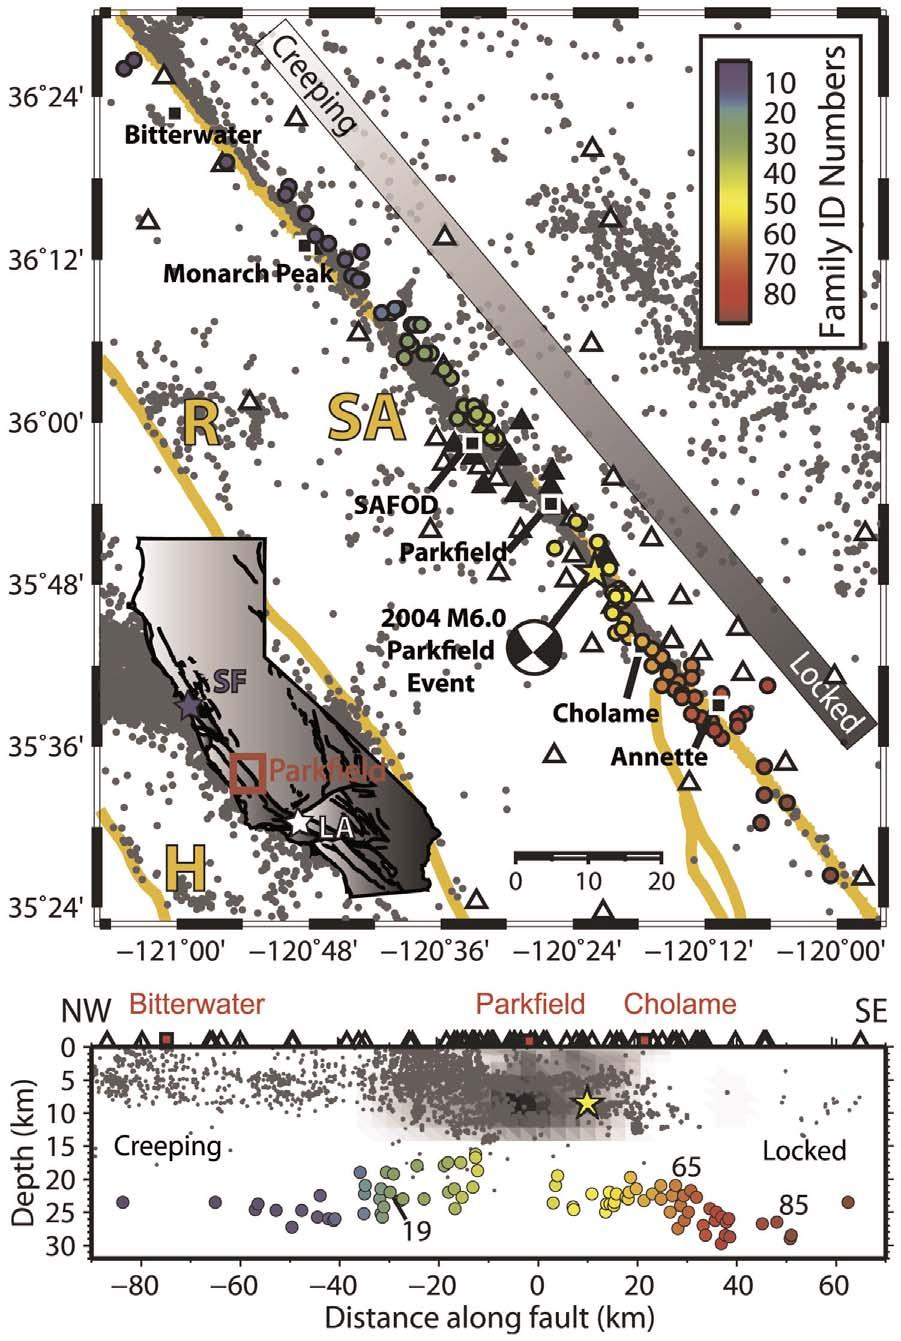 Figure 1. (top) Parkfield area location map with LFE locations are plotted as circles color-coded by family ID numbers organized from northwest to southeast along the fault.